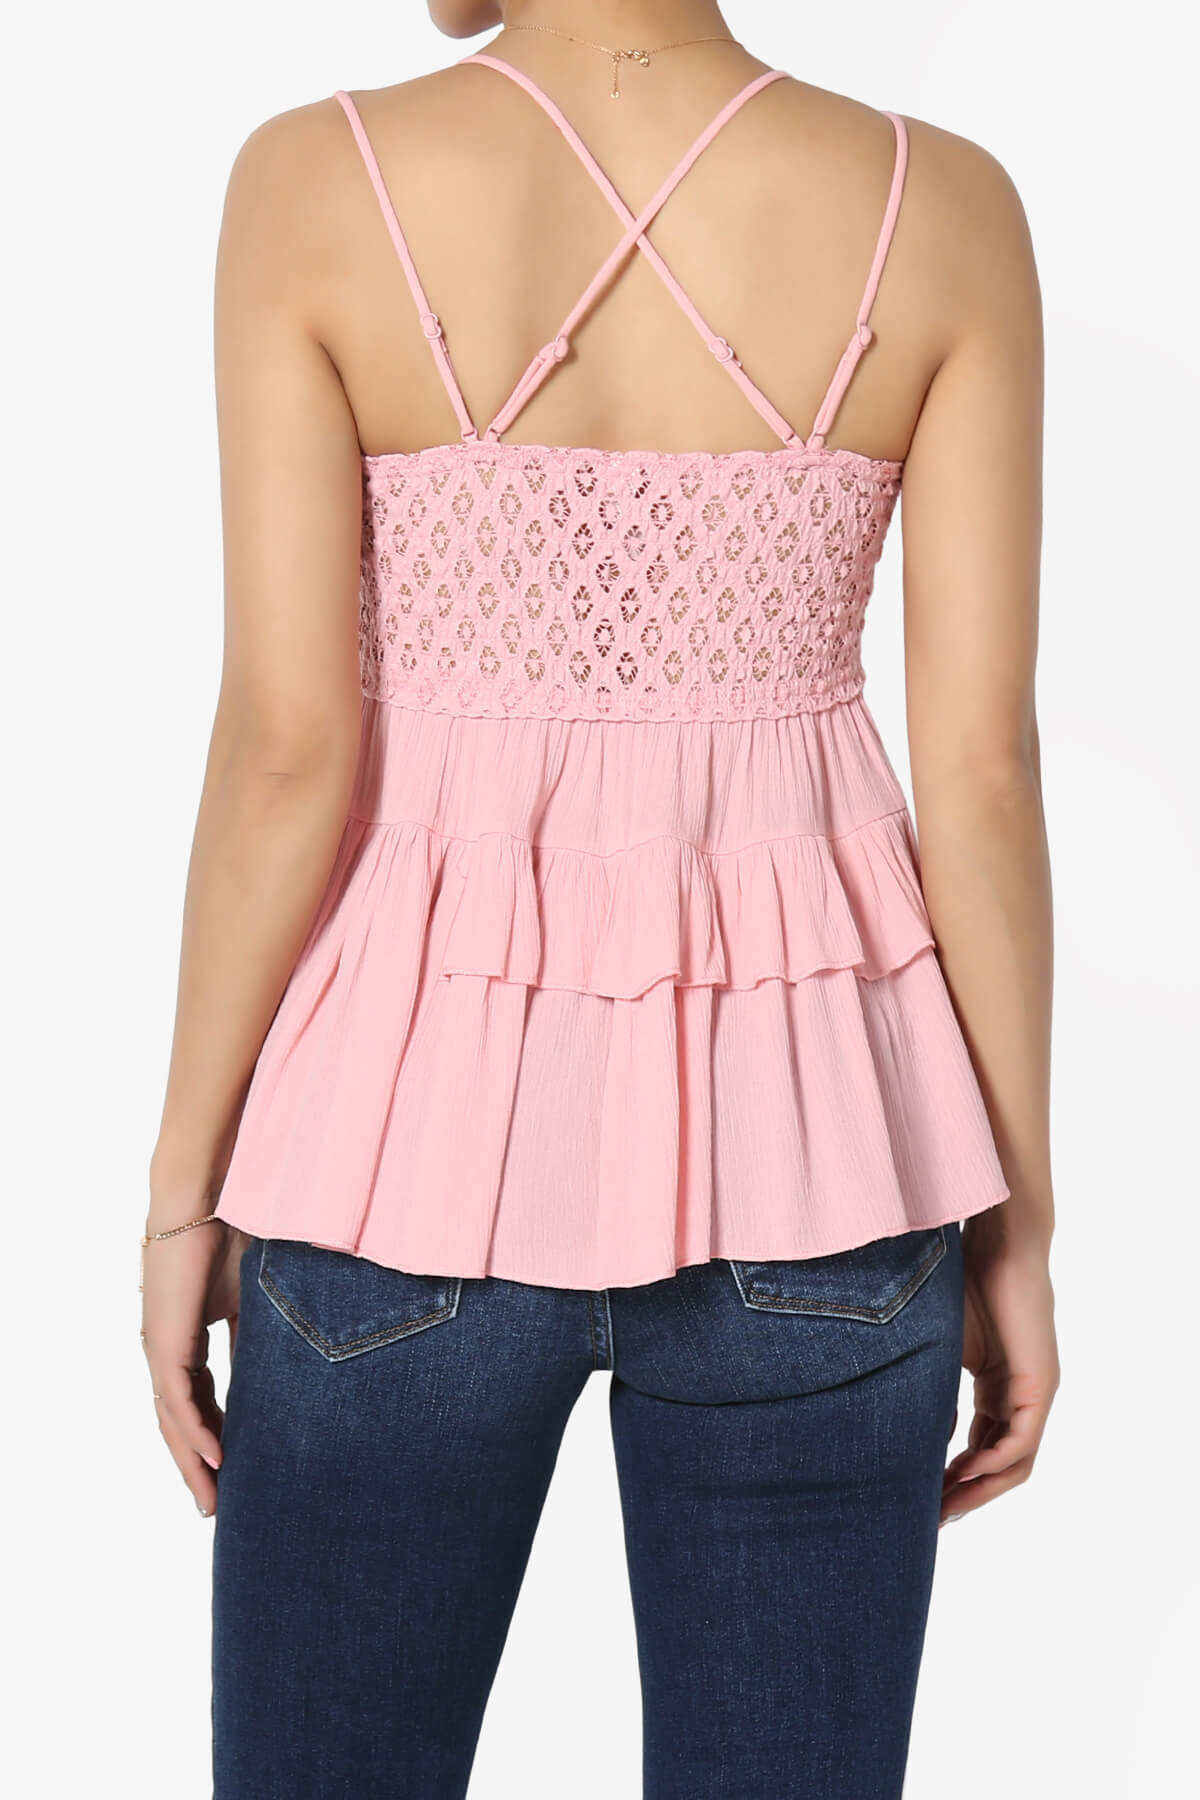 Load image into Gallery viewer, Lynden Crochet Lace Ruffle Peplum Cami DUSTY PINK_2
